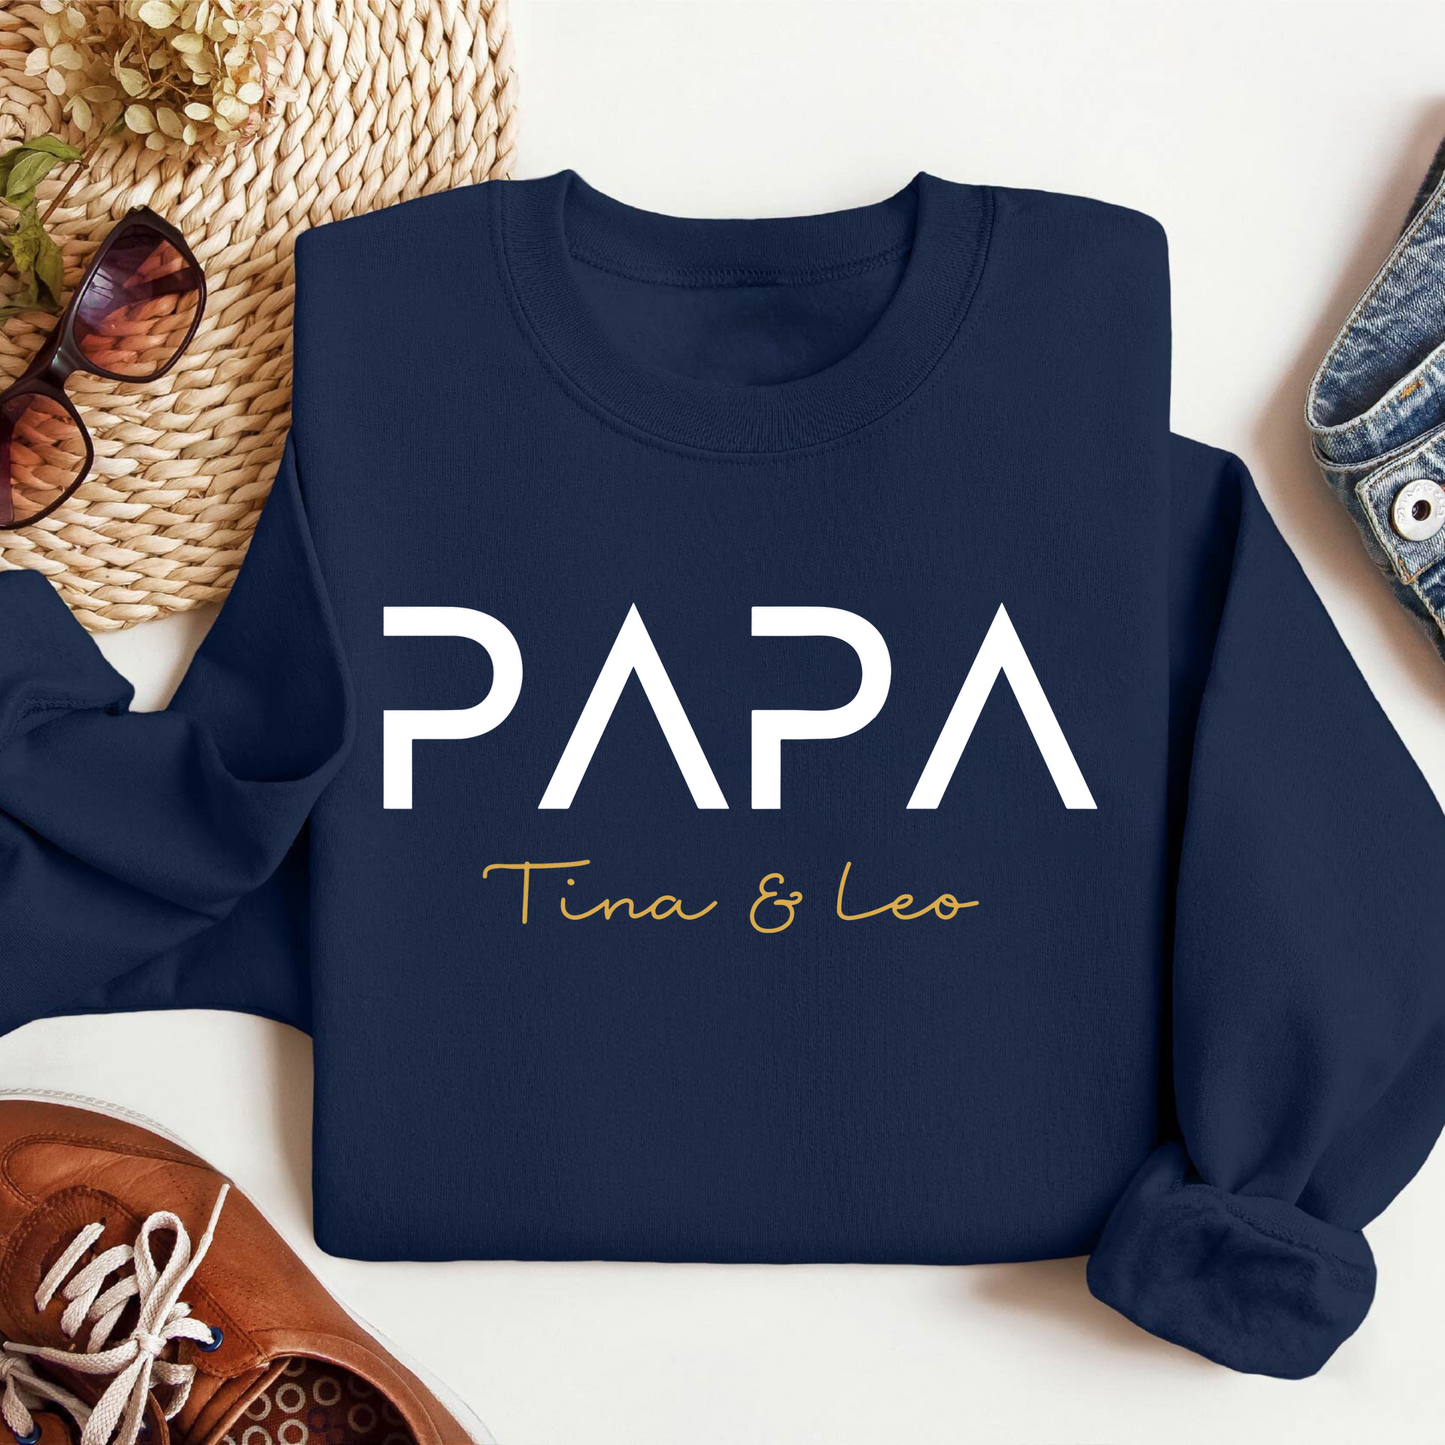 Custom Dad Shirt – Personalized with Children’s Names for Everyday Pride